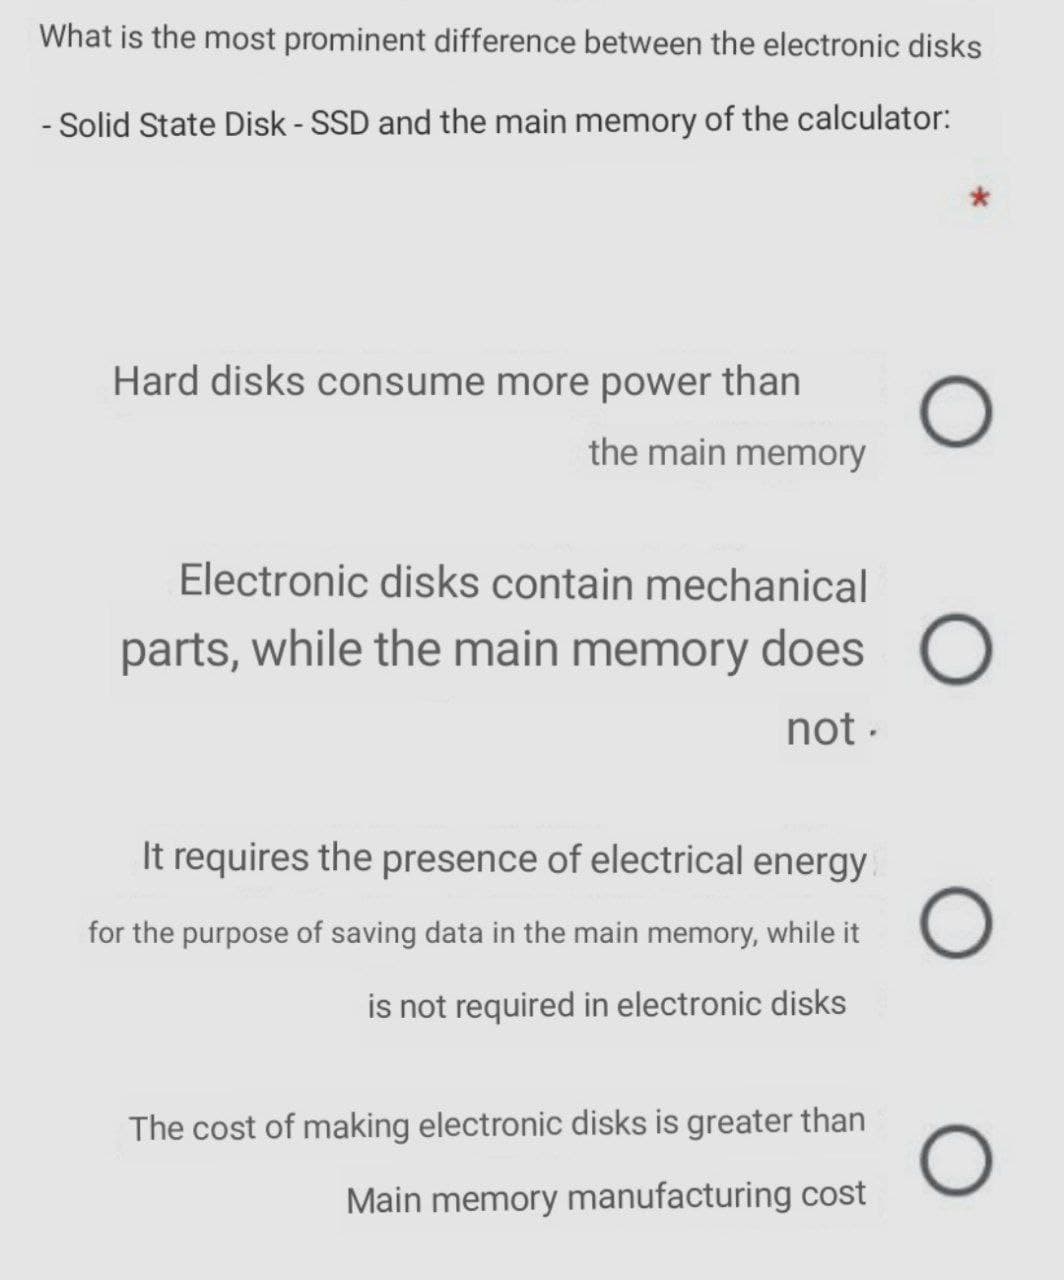 What is the most prominent difference between the electronic disks
- Solid State Disk - SSD and the main memory of the calculator:
Hard disks consume more power than
the main memory
Electronic disks contain mechanical
parts, while the main memory does
not -
It requires the presence of electrical energy
for the purpose of saving data in the main memory, while it
is not required in electronic disks
The cost of making electronic disks is greater than
Main memory manufacturing cost
